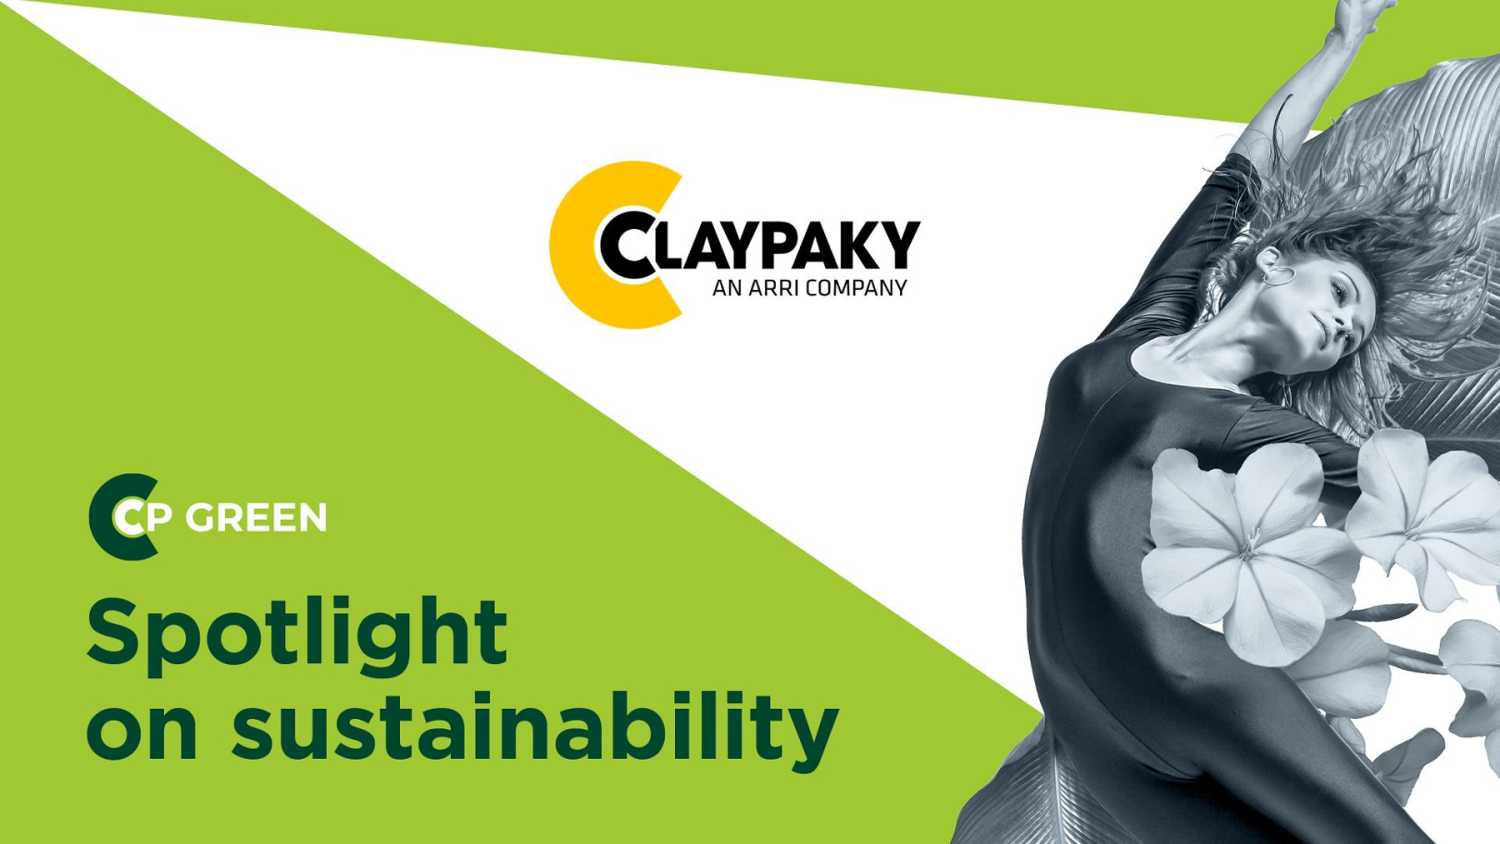 Claypaky has started to substantially reduce its carbon footprint